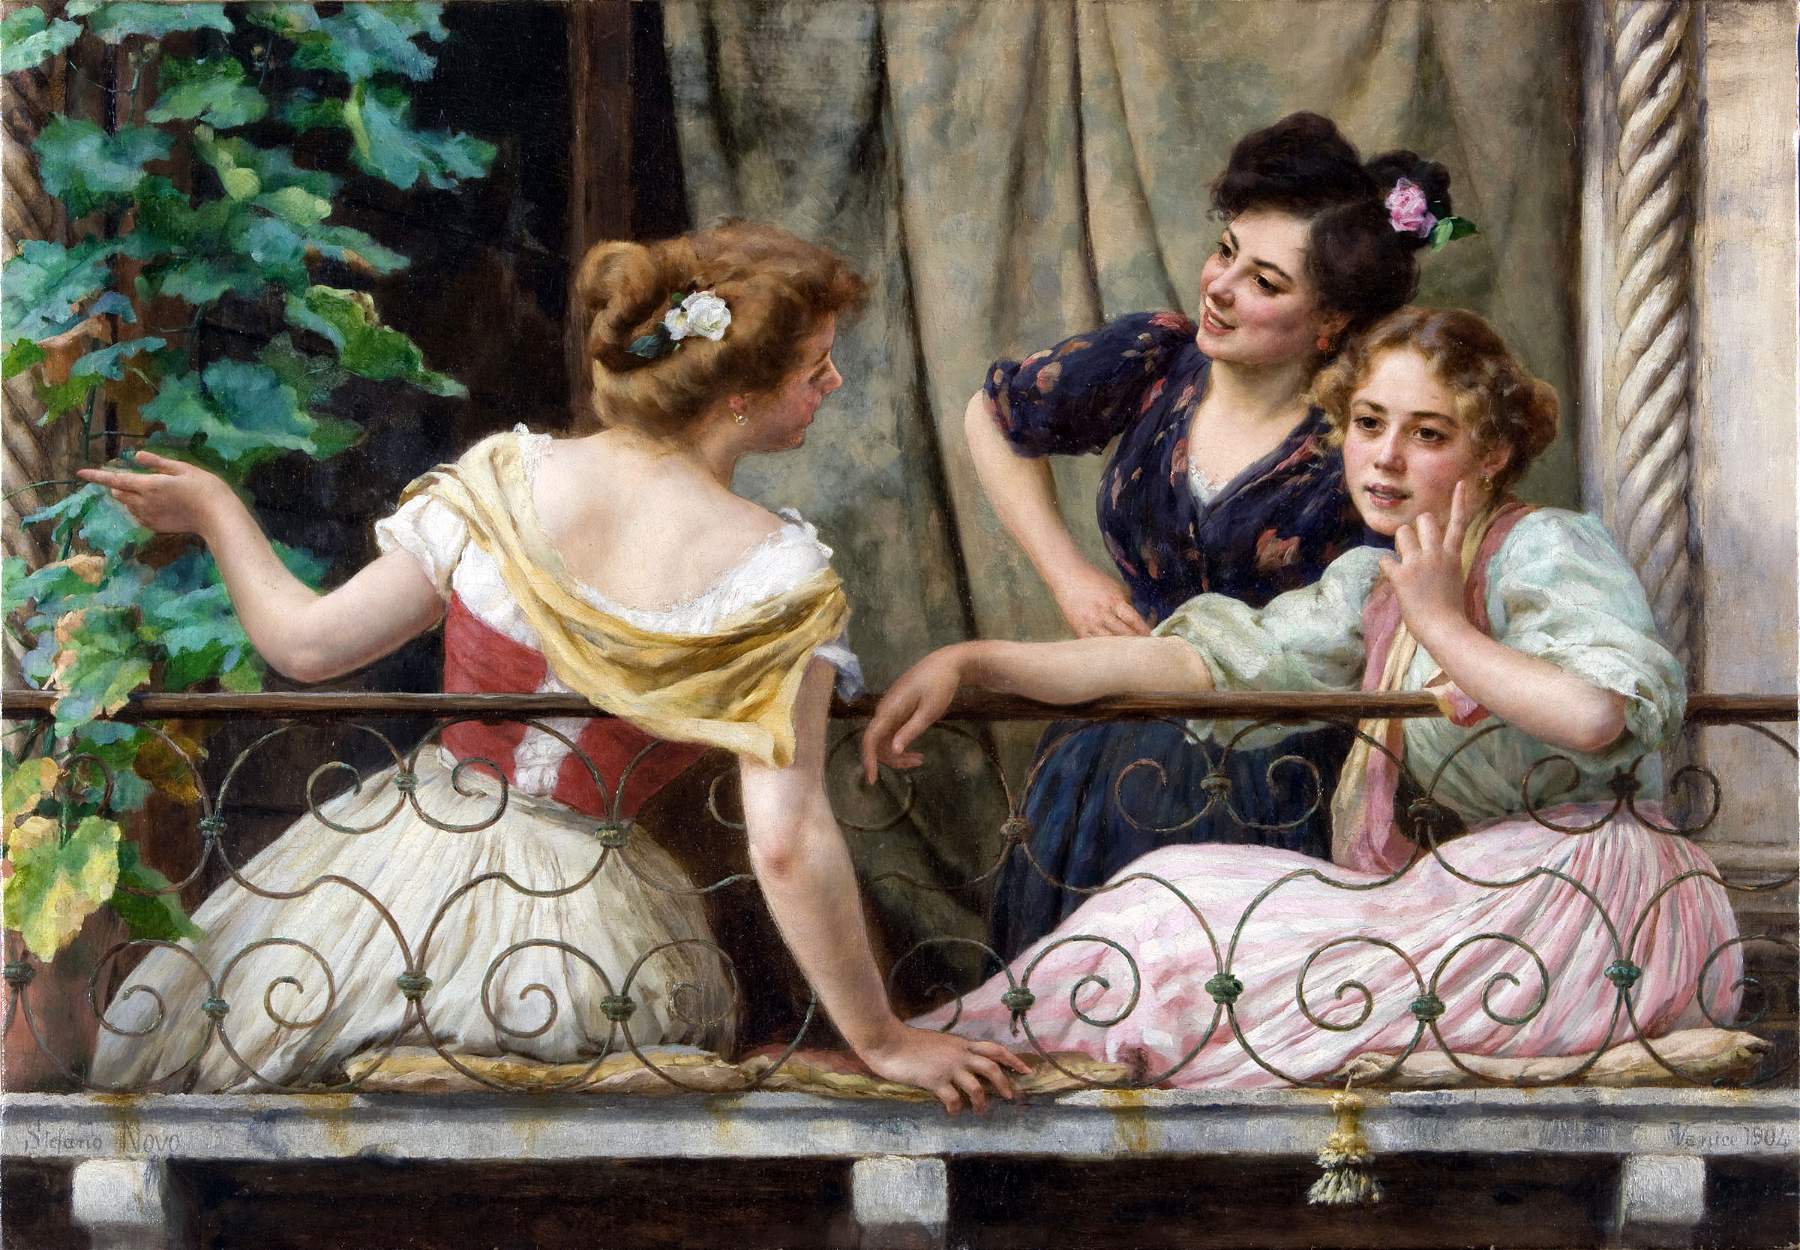 Brescia, an exhibition to celebrate women in art history, from Titian to Boldini